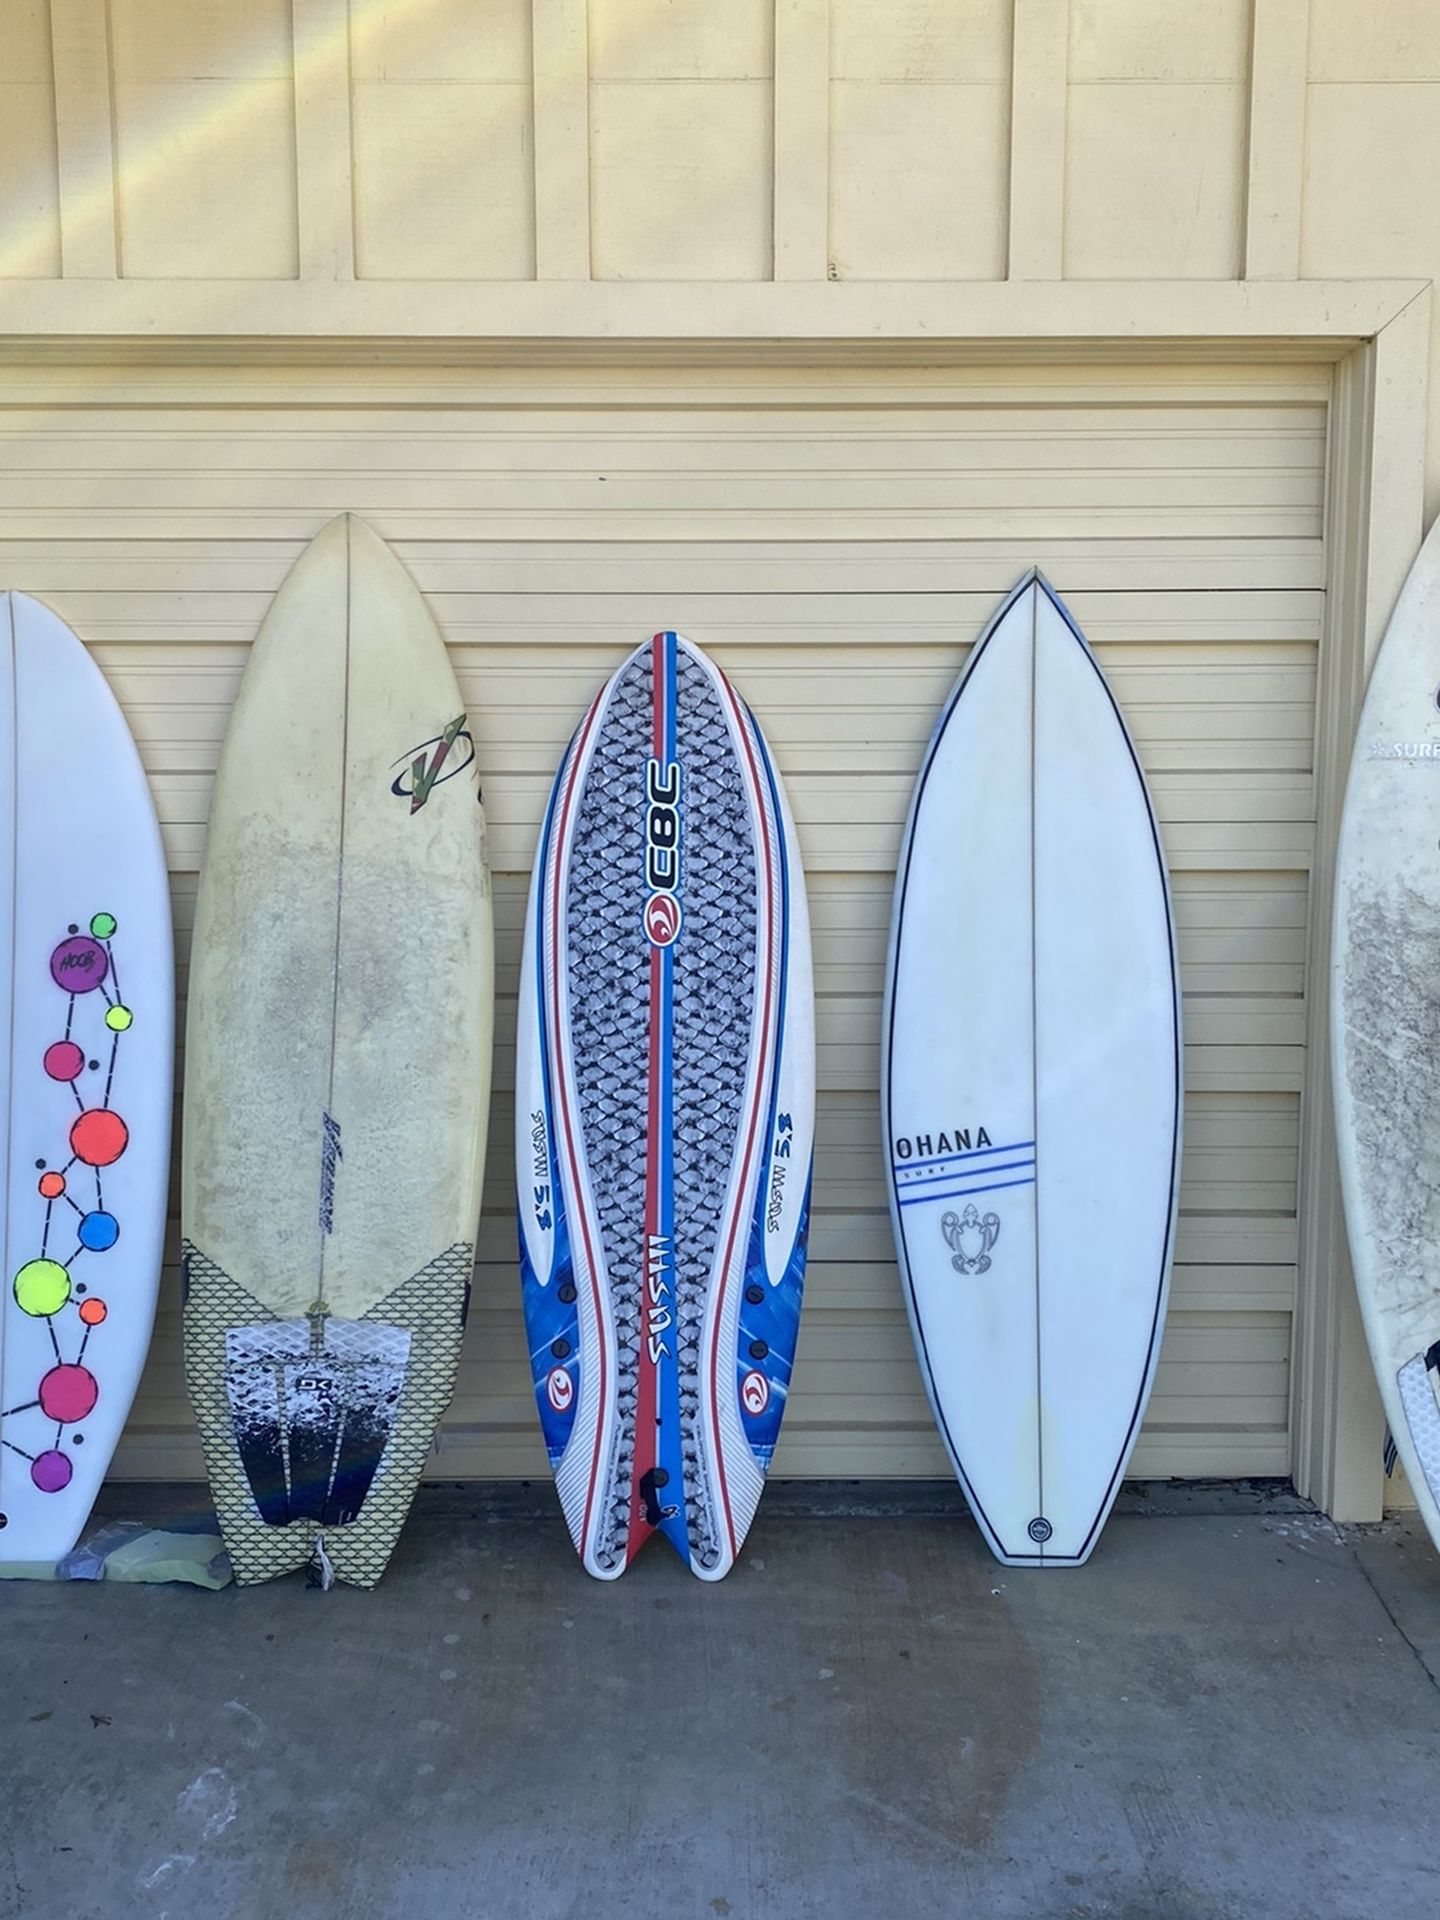 New And Used Boards For Sale! Message For Details